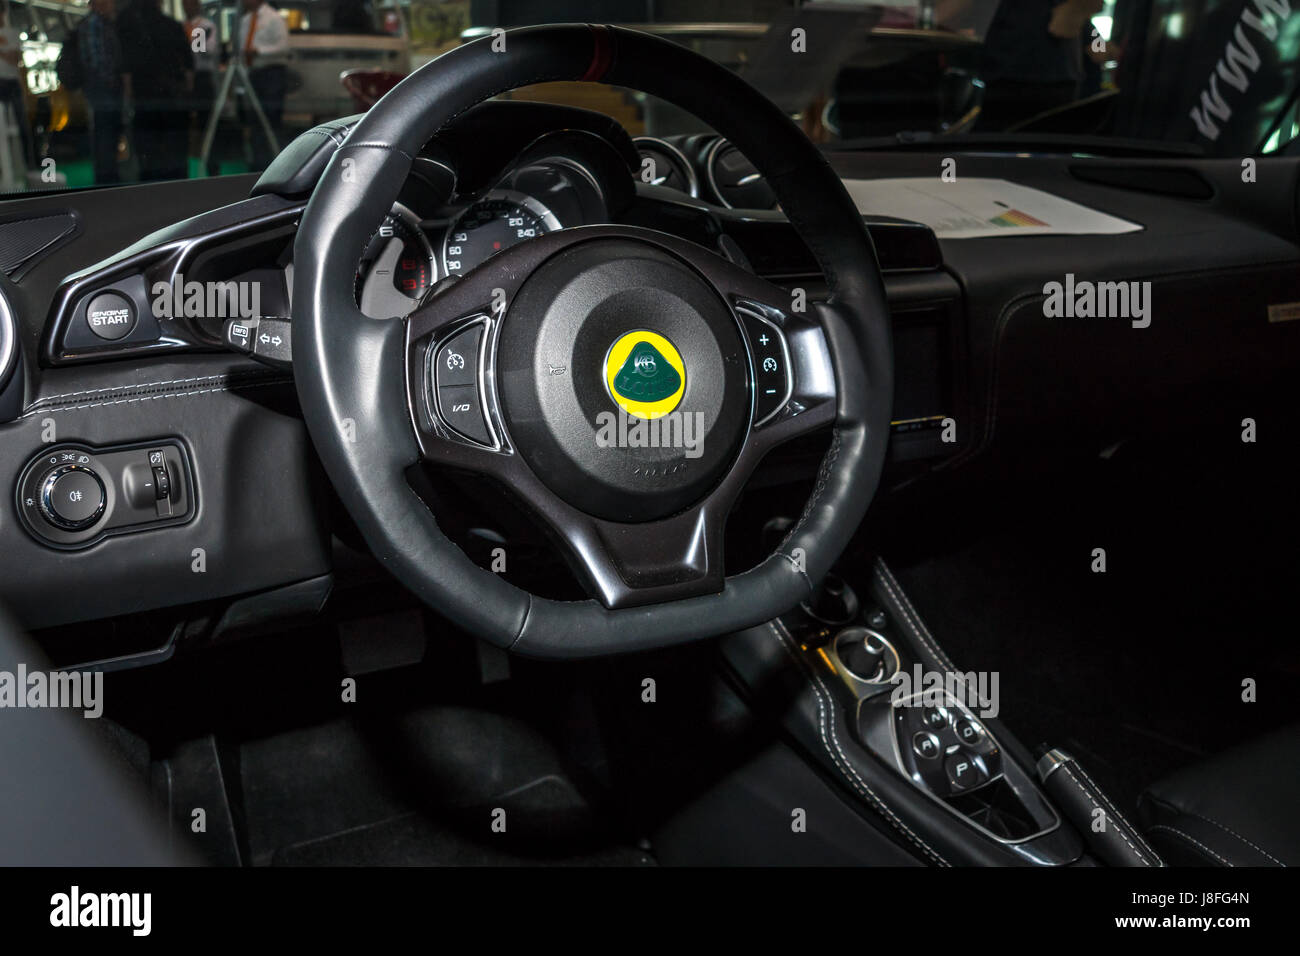 Interior Of The Sports Car Lotus Evora 400 Essex By Bf